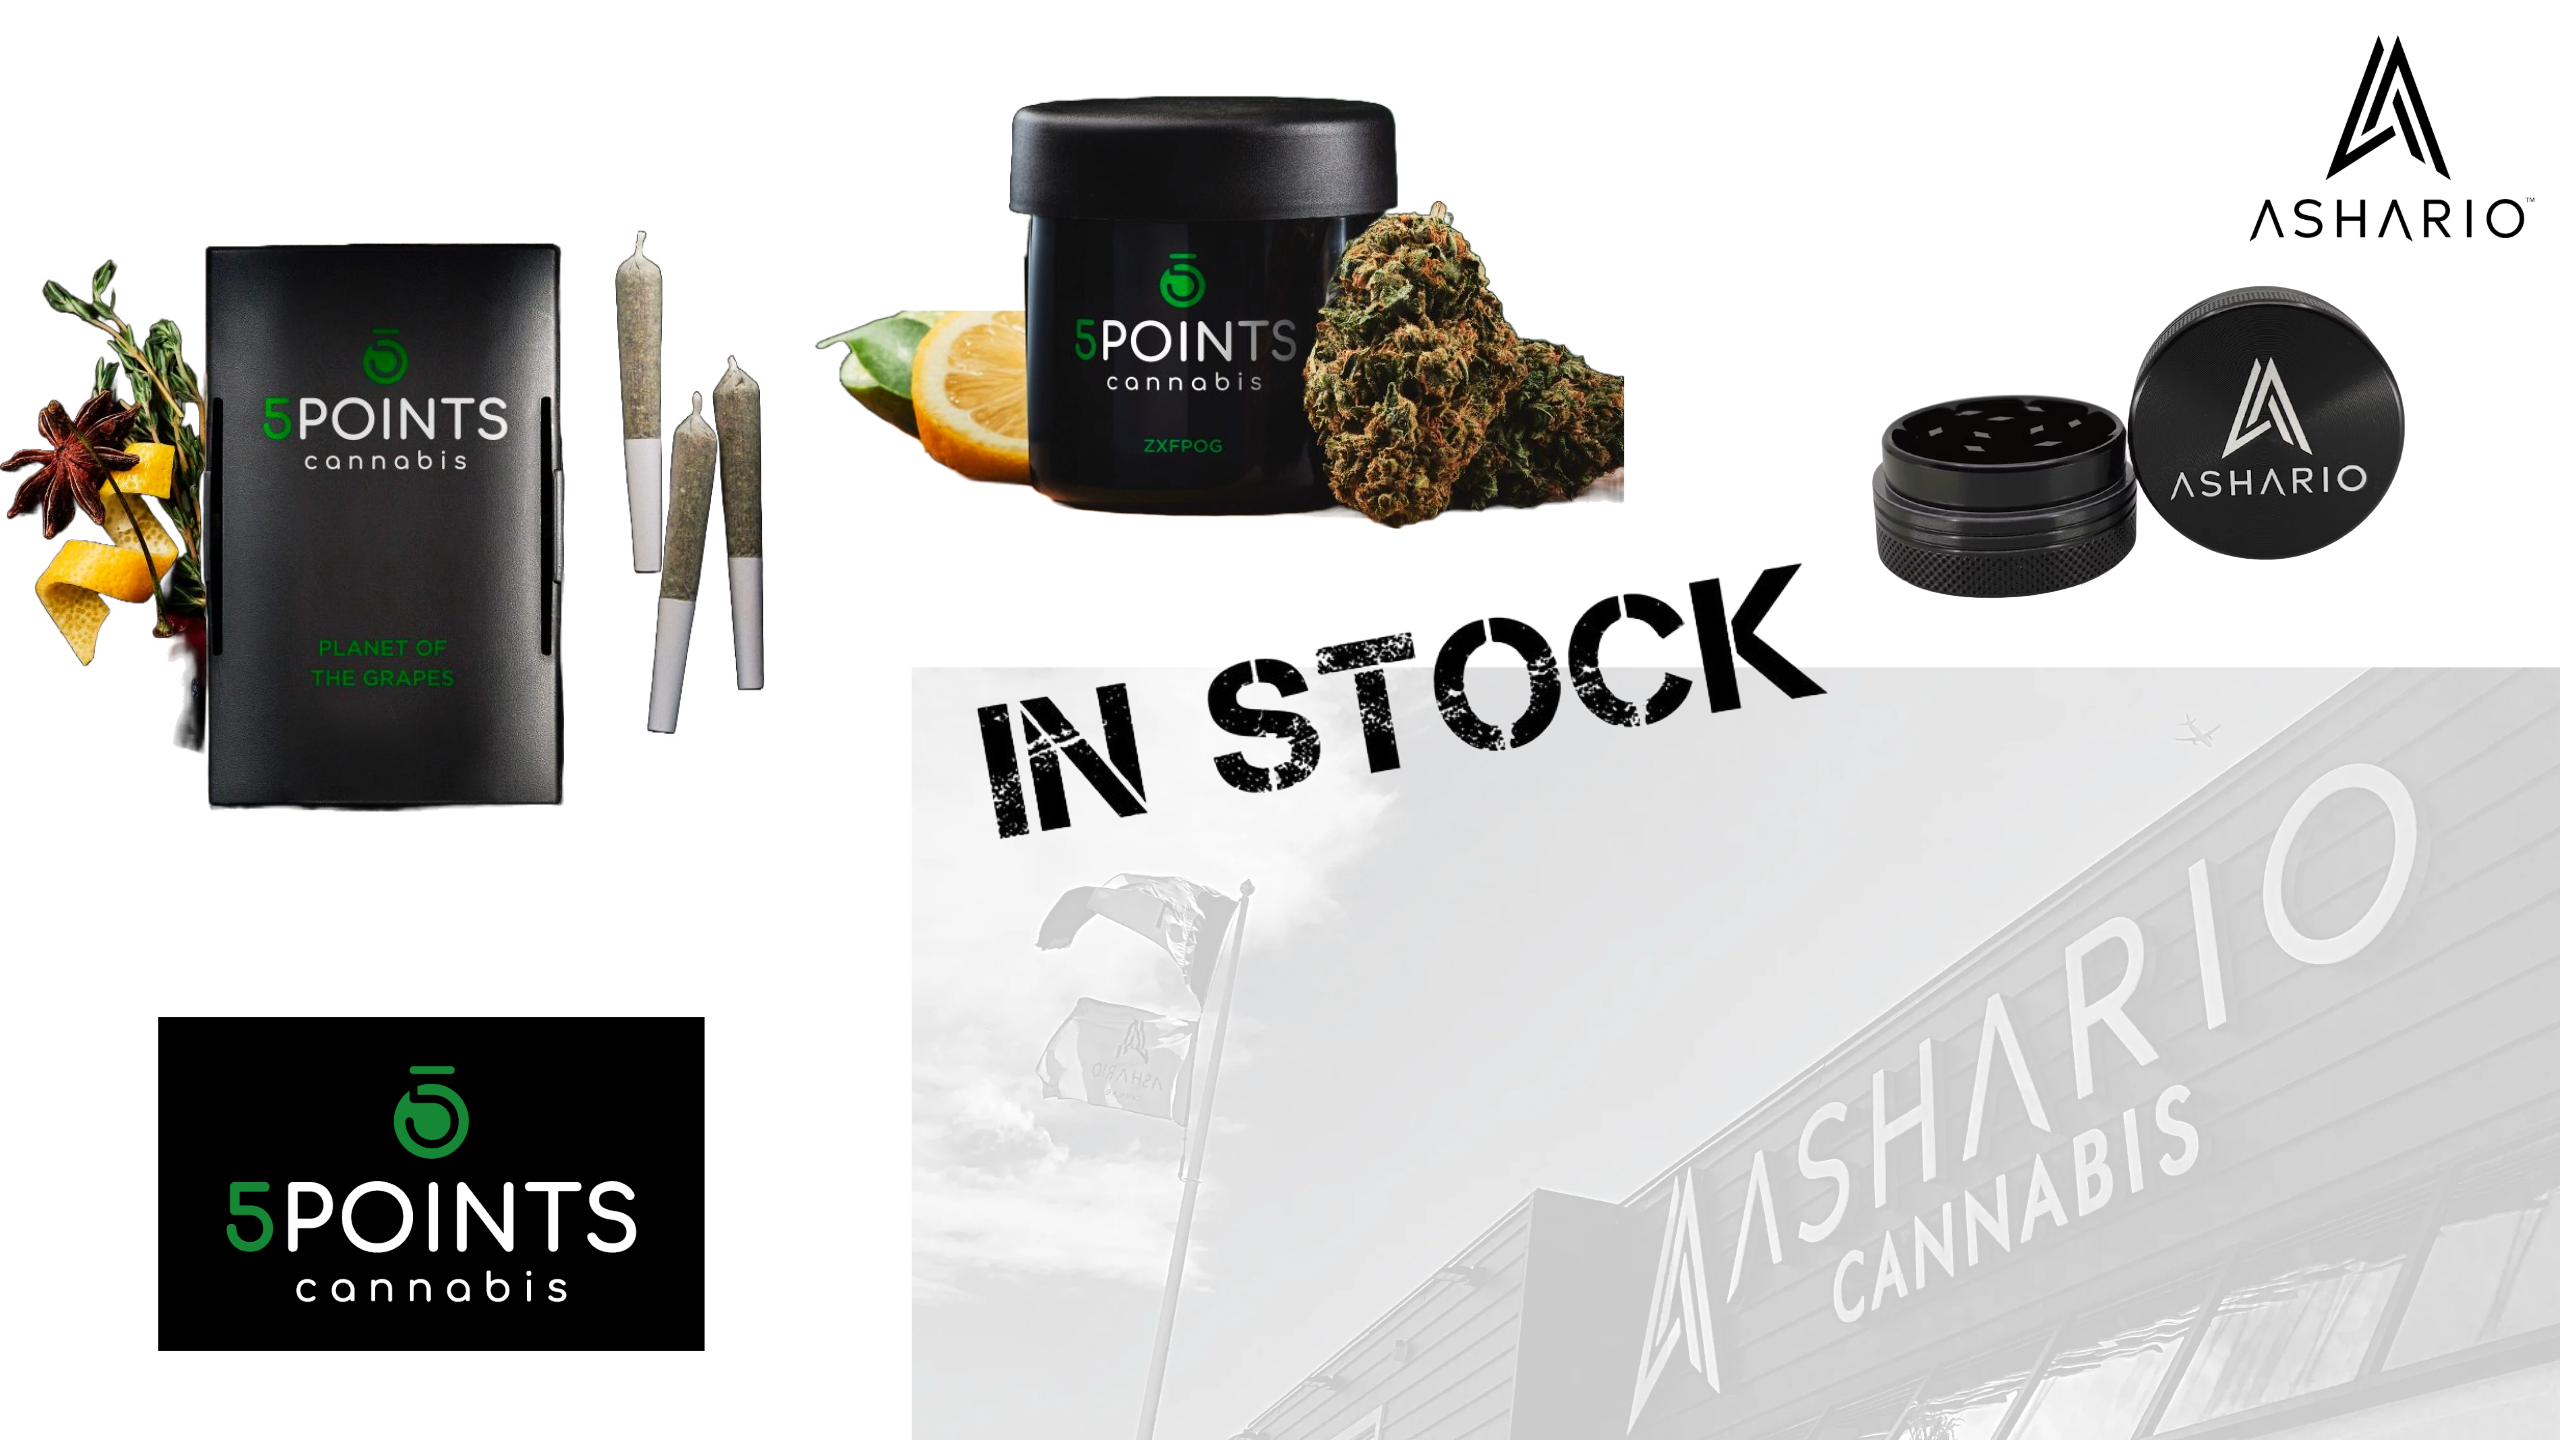 5 Points Cannabis - Quality; Cost Efficiency Hand in Hand